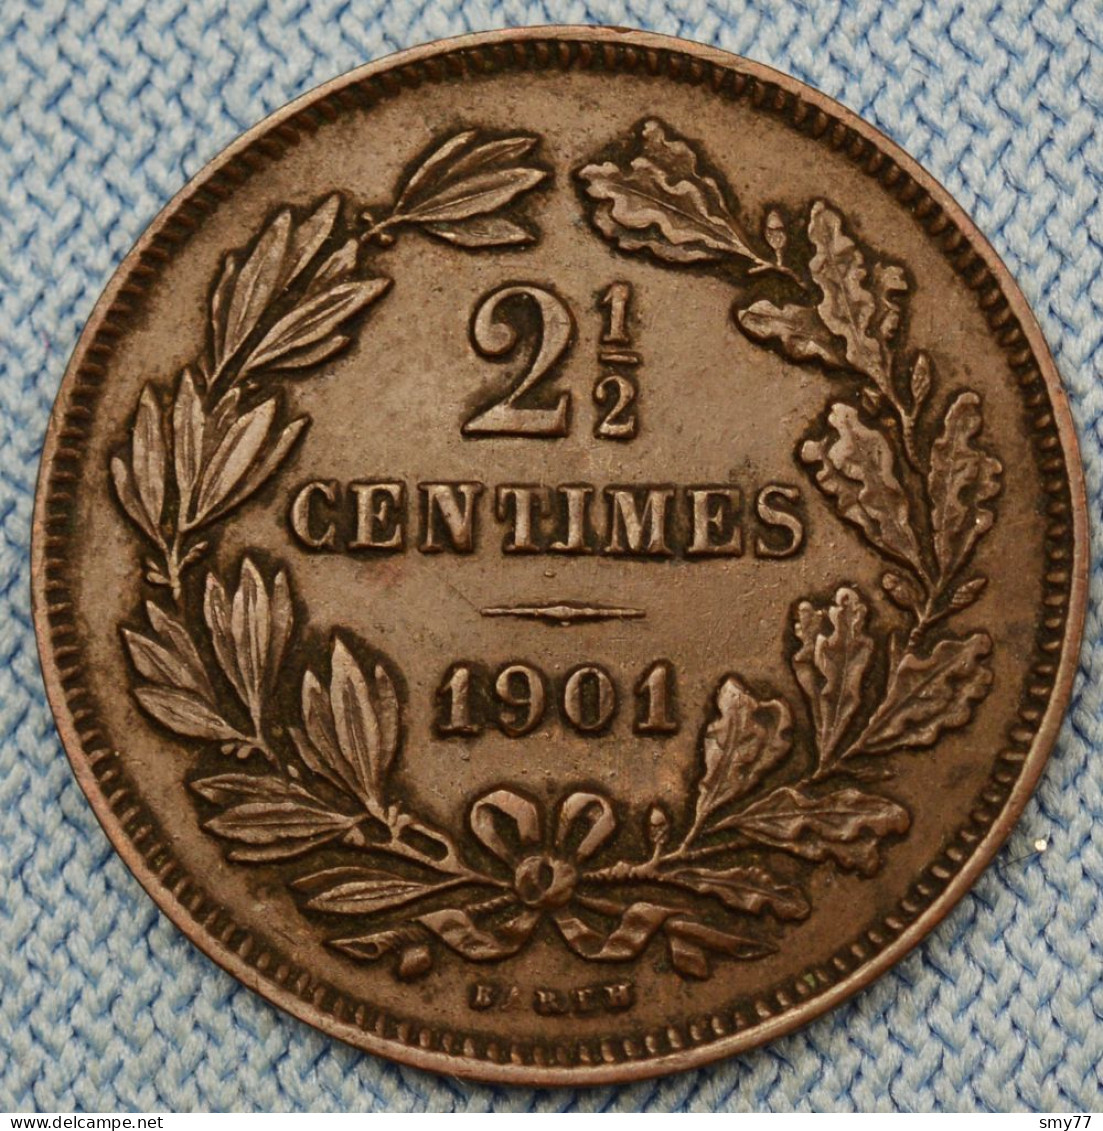 Luxembourg • 2 1/2 Centimes 1901 • SUP / XF+  • B_RTH - Error - A Almost Absent • Luxemburg •  [24-573] - Luxemburgo